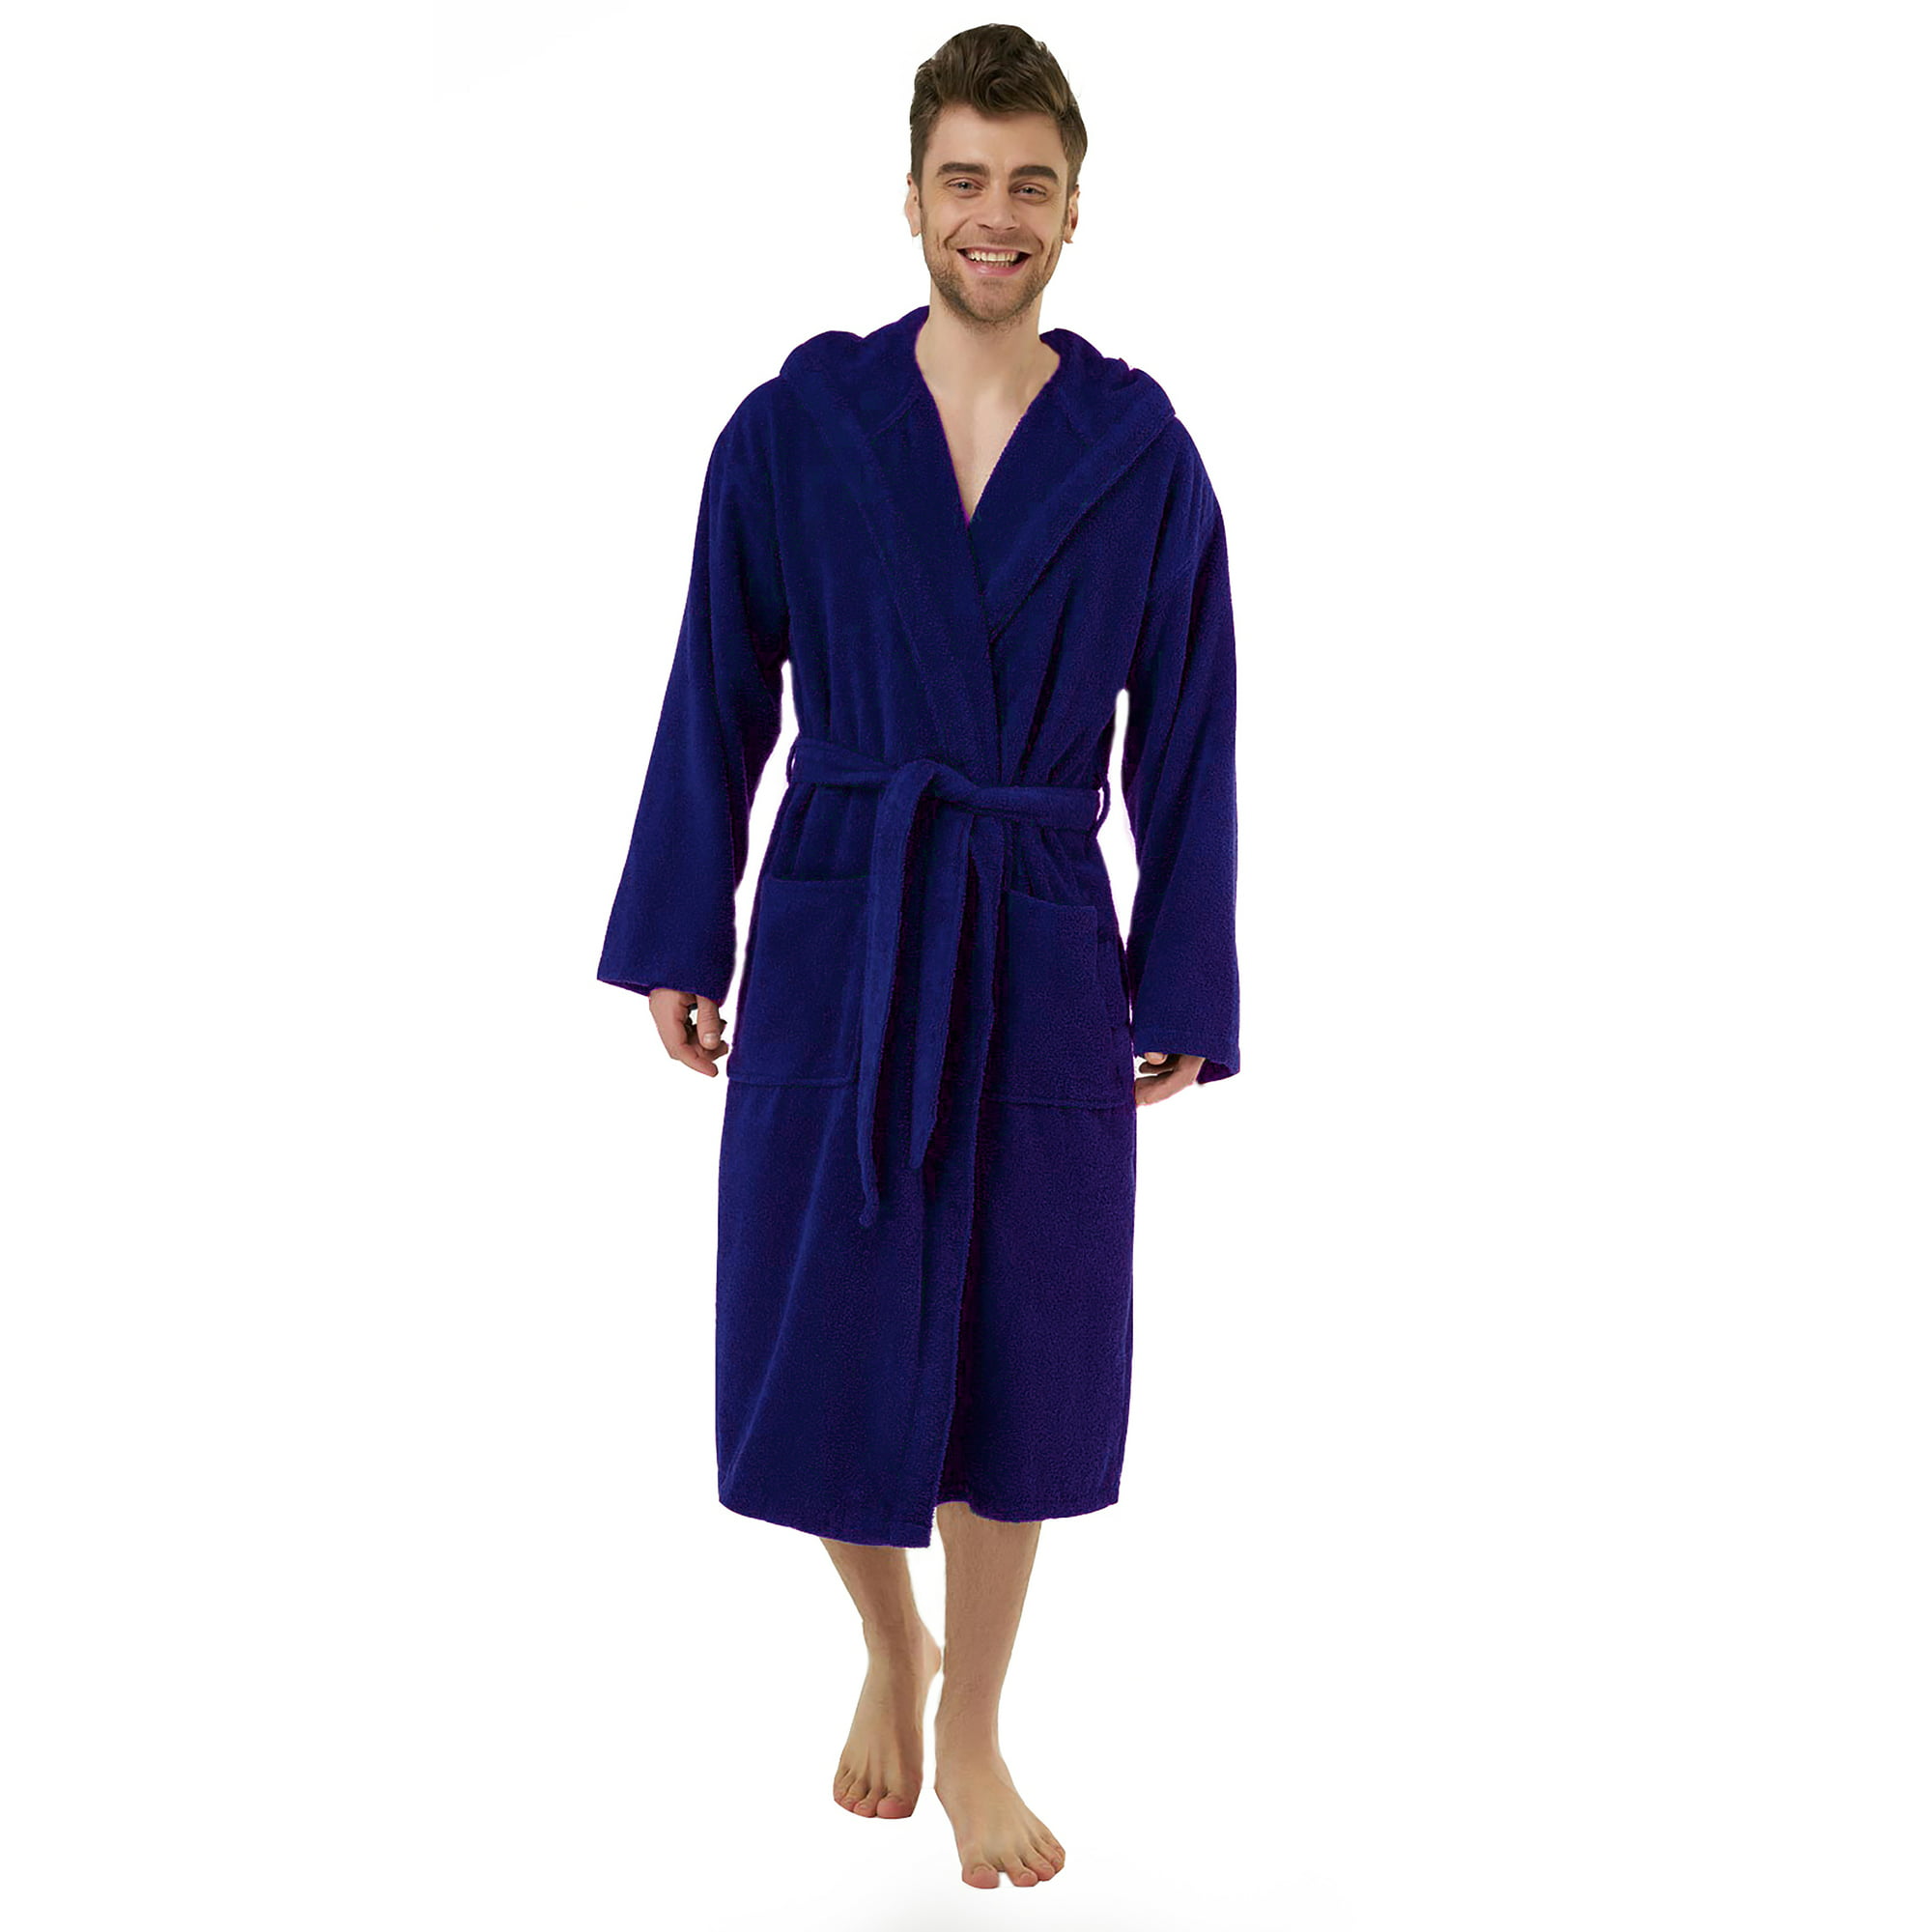 Spa & Resort Sales Royal Blue Hooded Polar Fleece Robe for Men. 50 inch Length, Fist most Medium, Large and XL Sizes. 